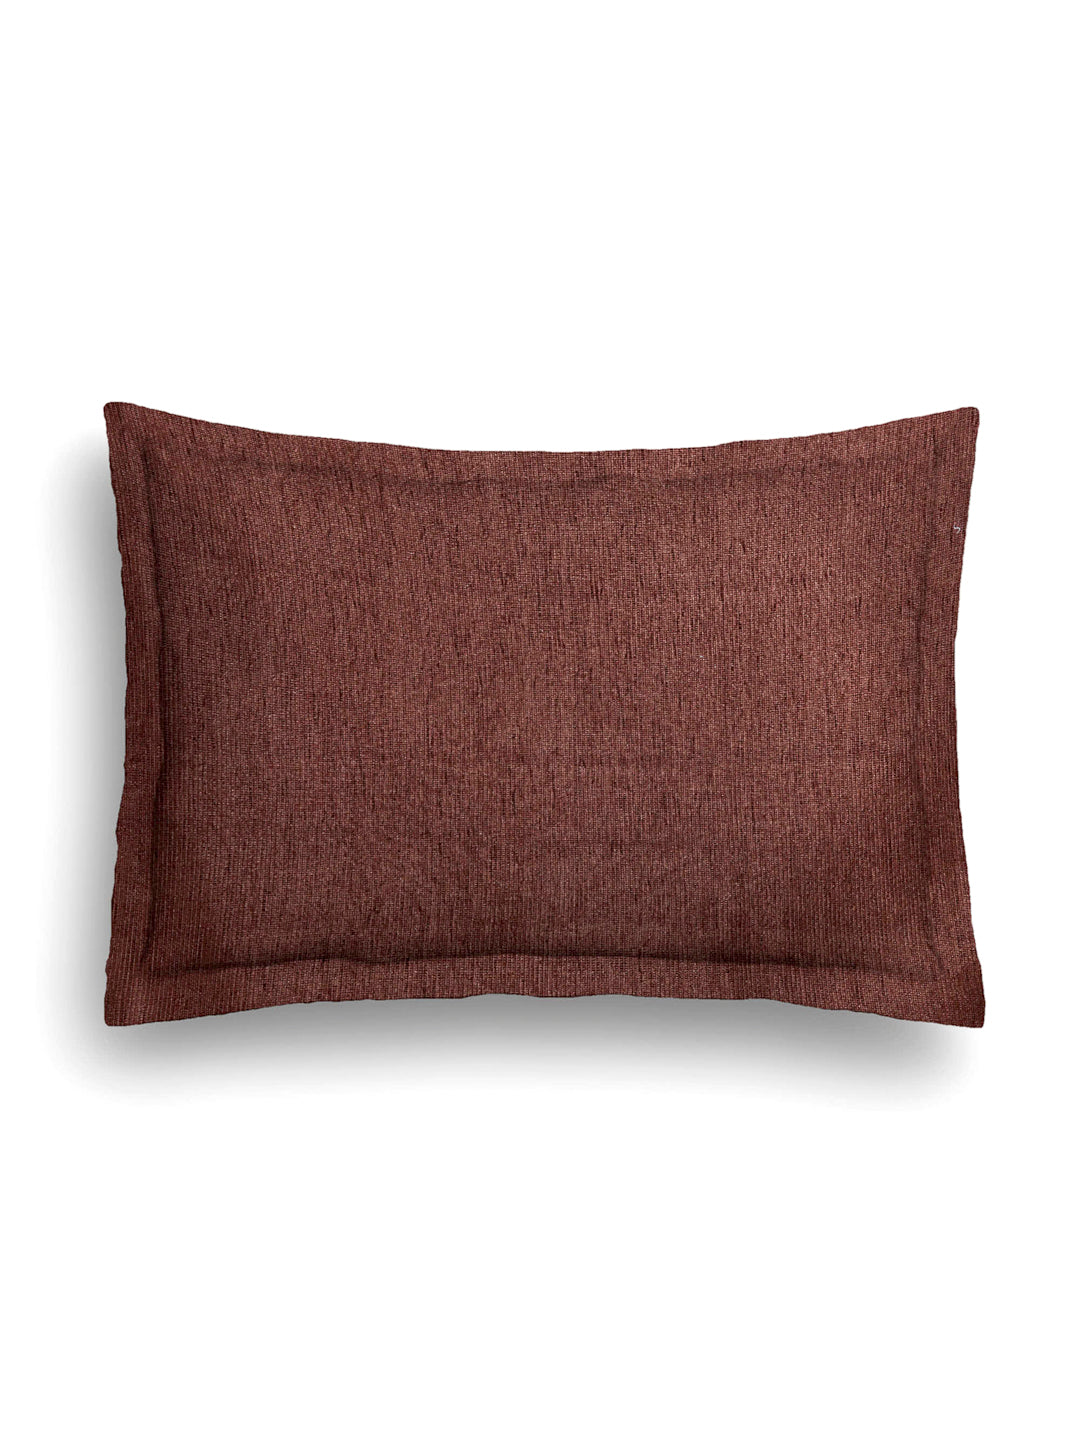 Arrabi Brown Solid Handwoven Cotton Set of 2 Pillow Covers (70 x 45 cm)